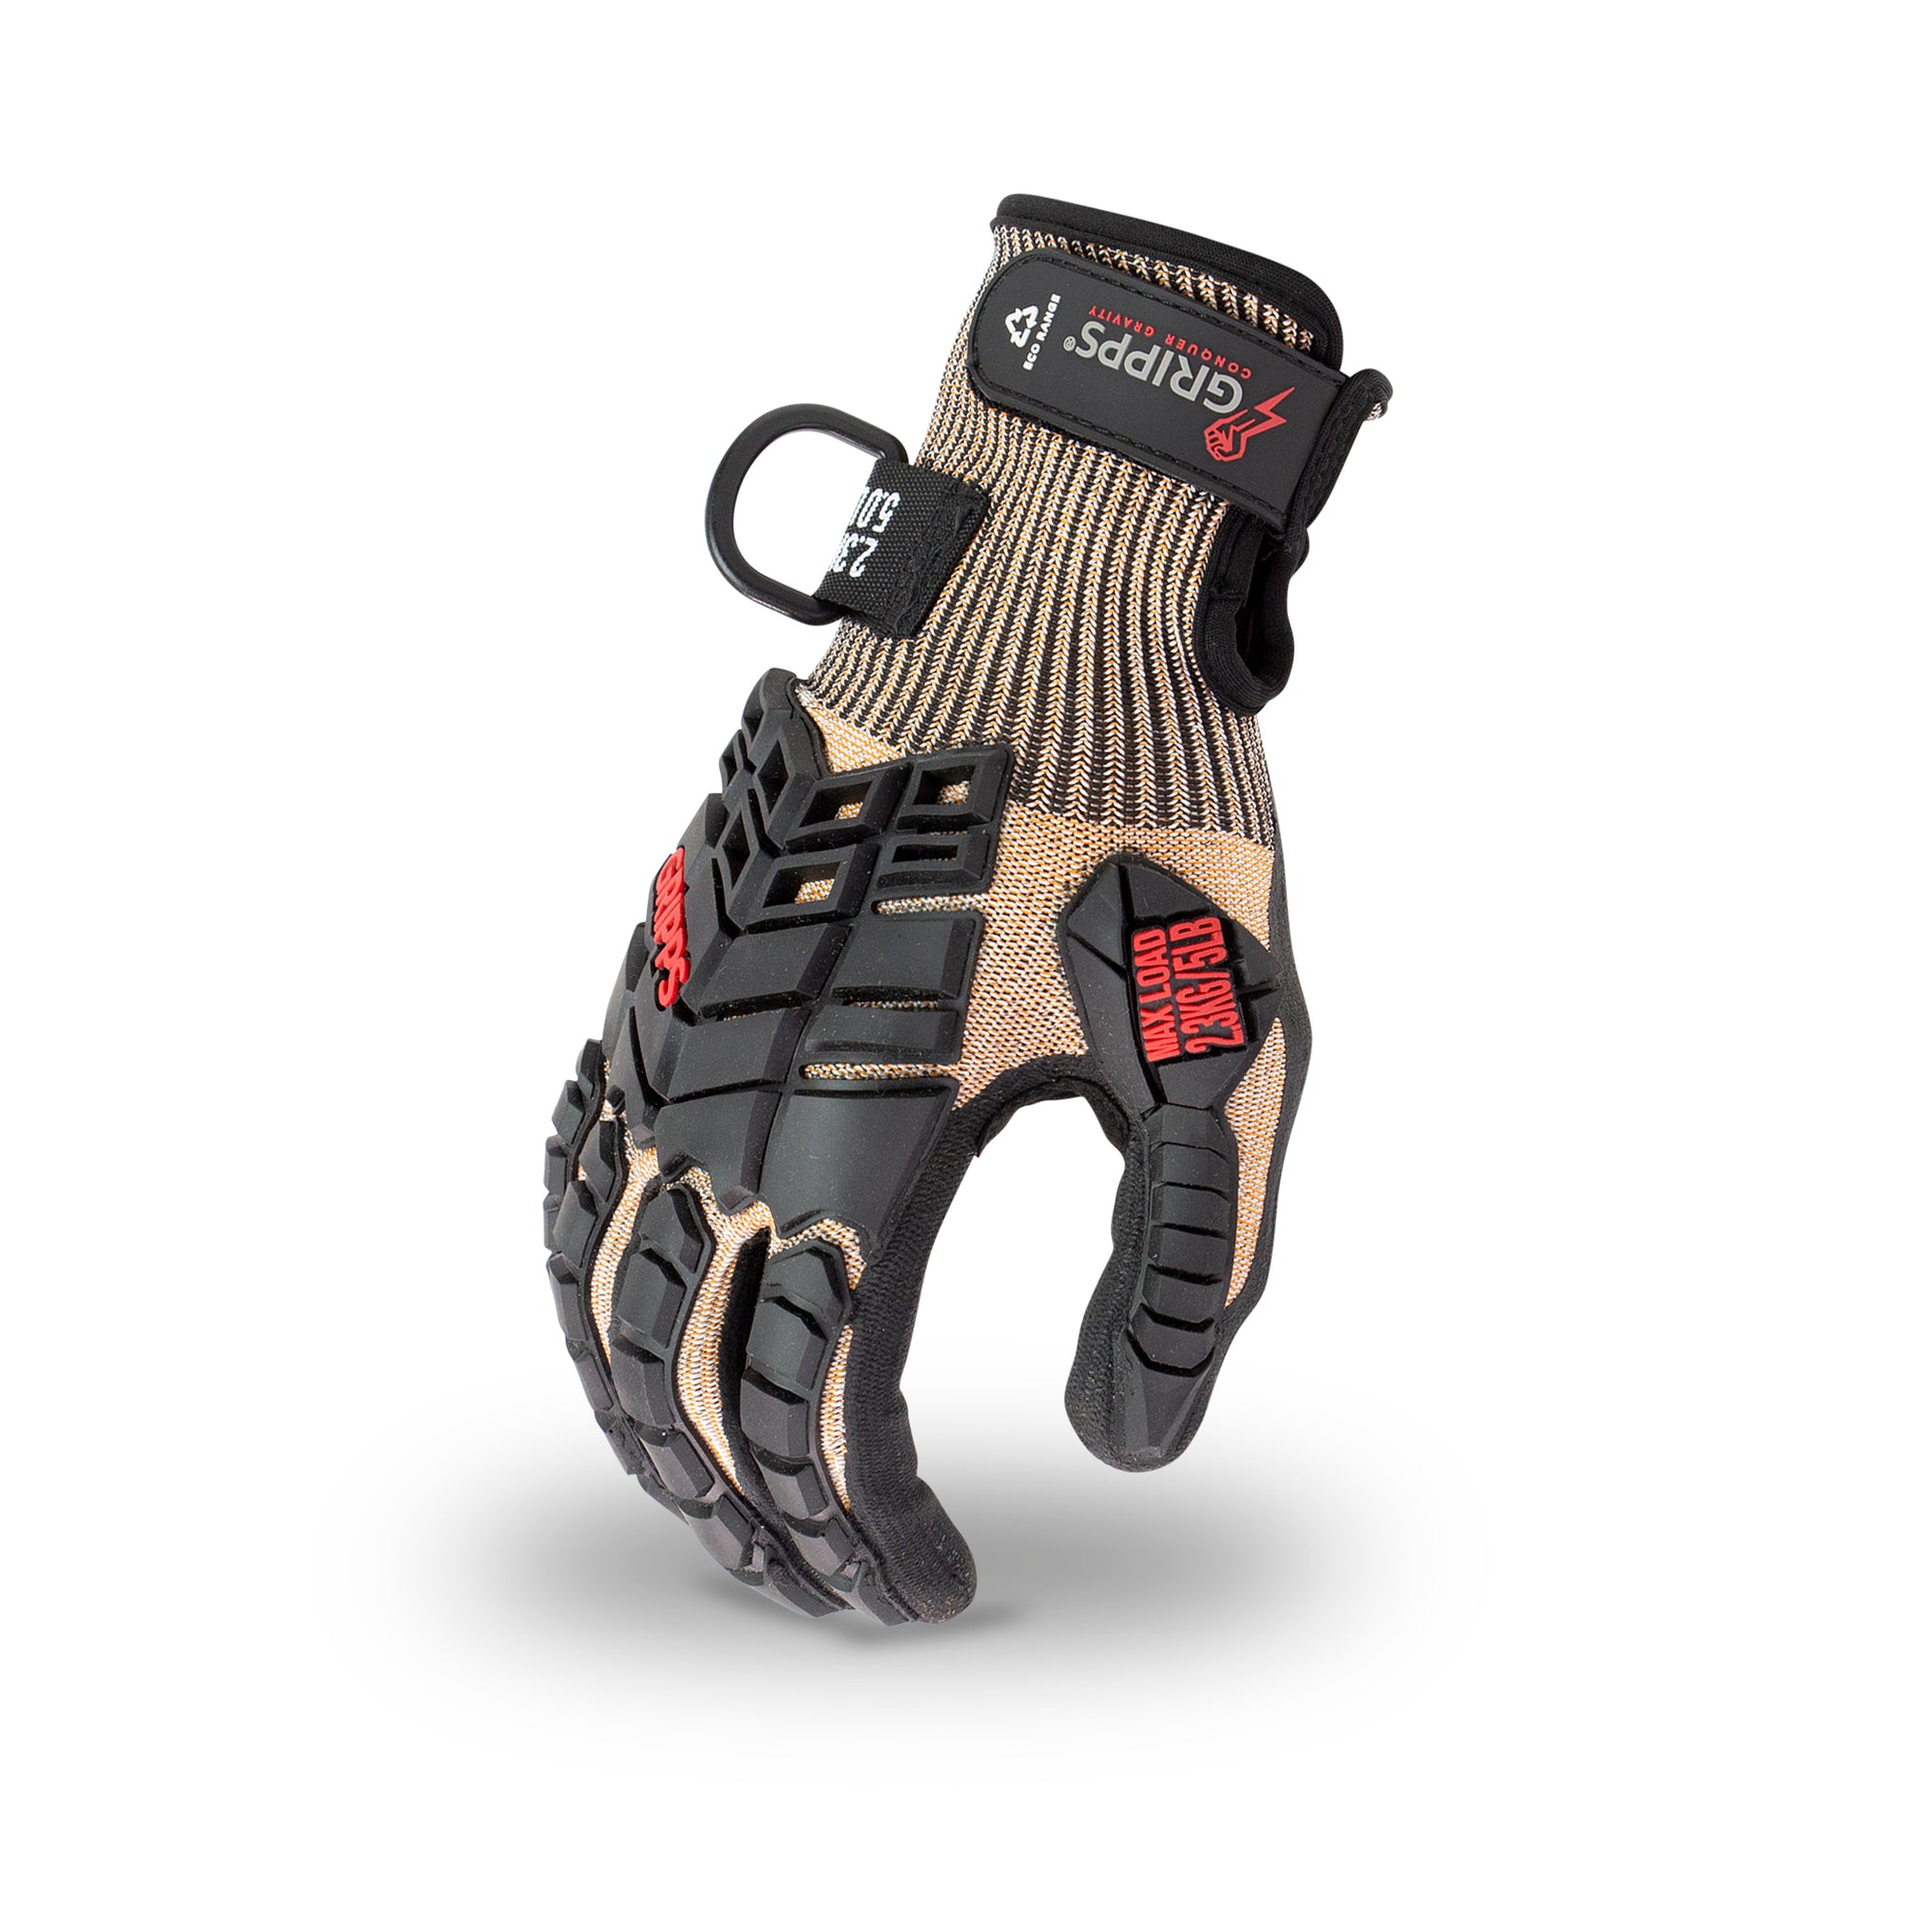 Gripps C5 Eco A5 Impact Gloves from GME Supply